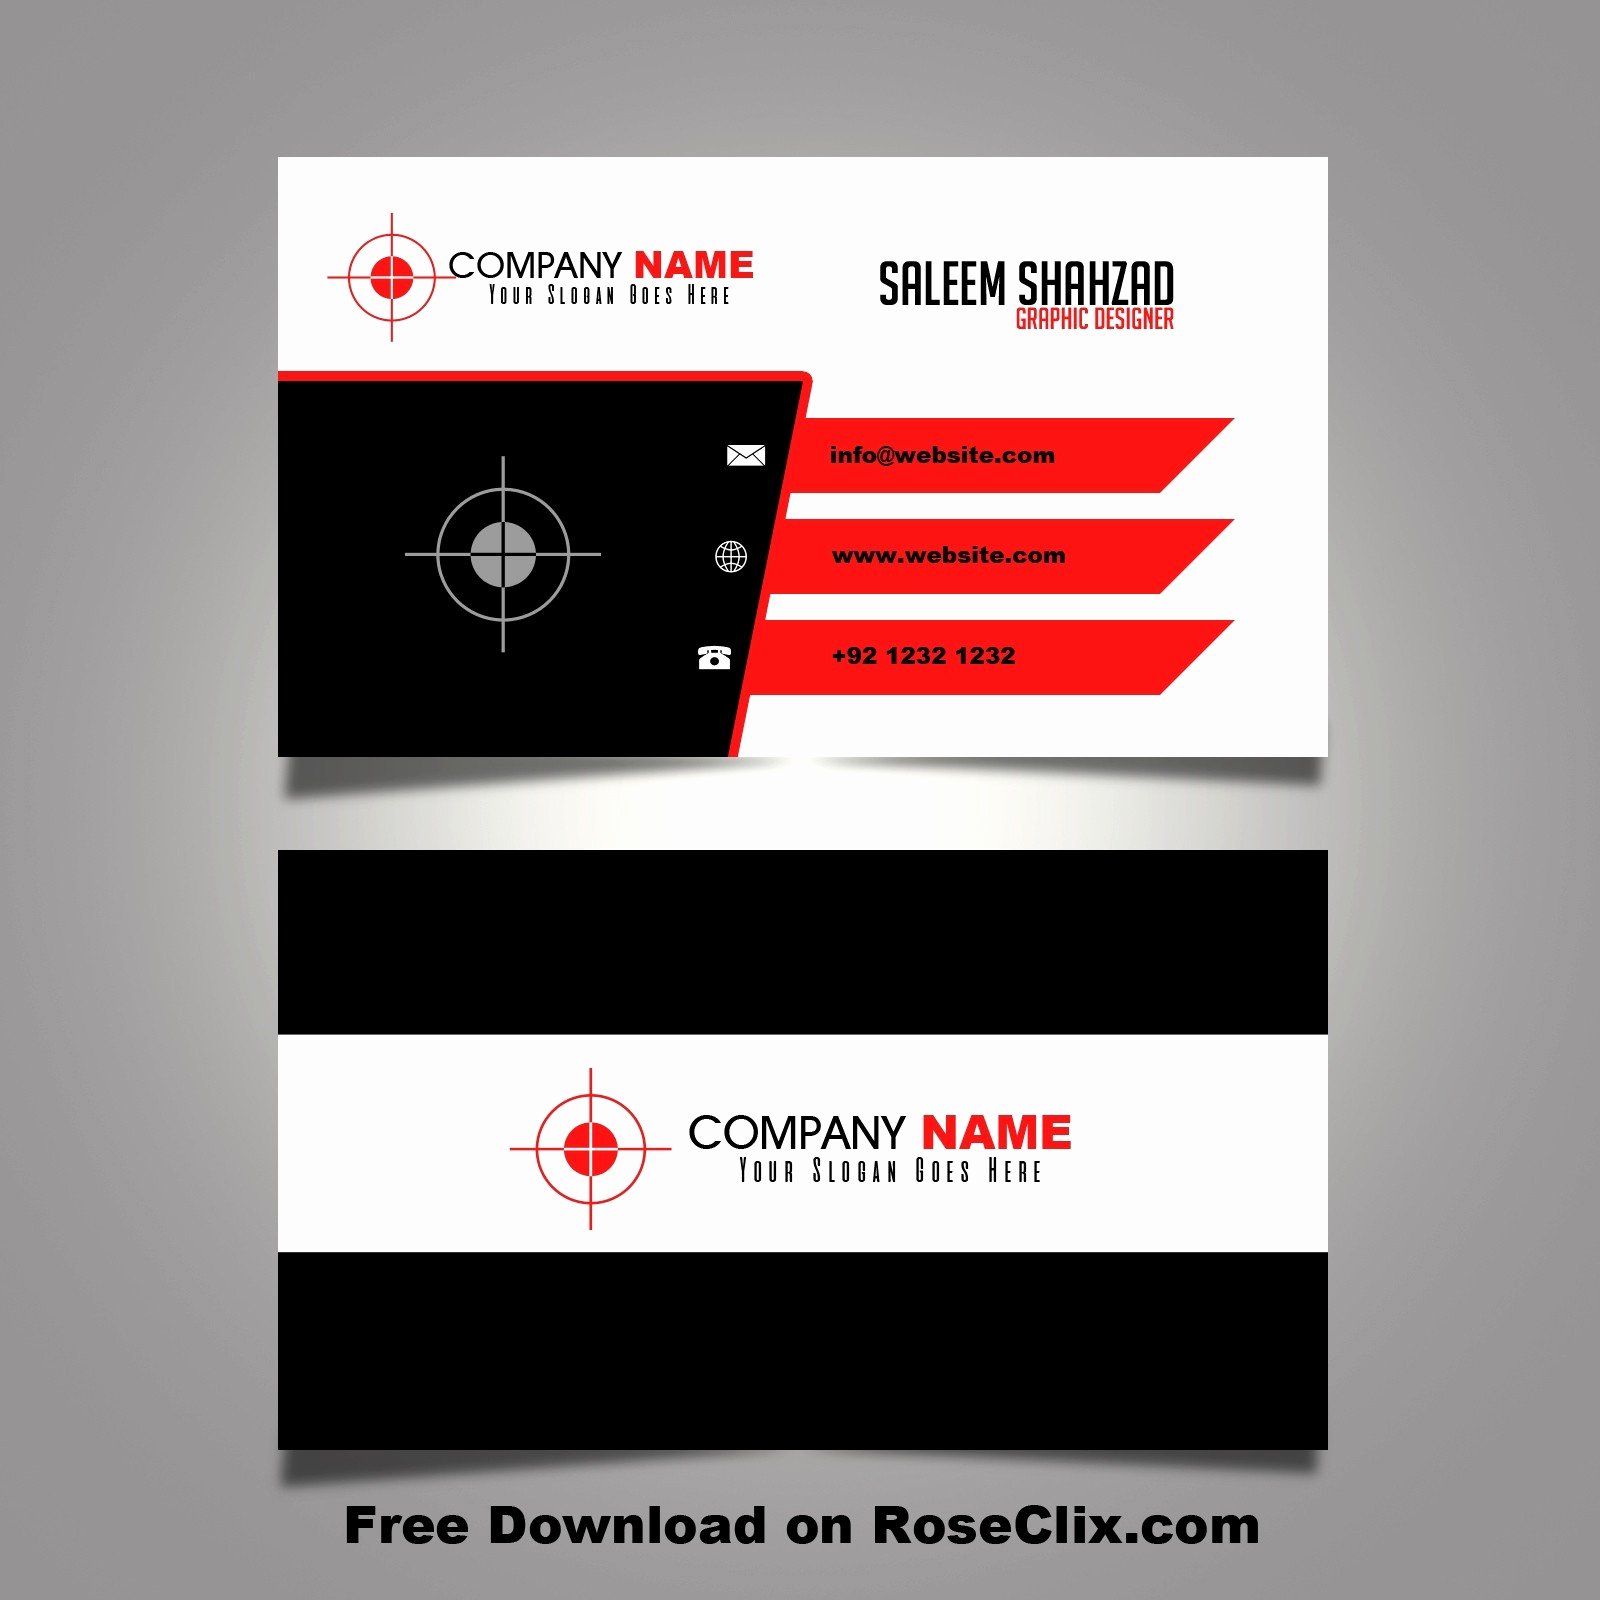 Blank Business Card Template Psd Unique Blank Business Card Template Psd Reference Free Business